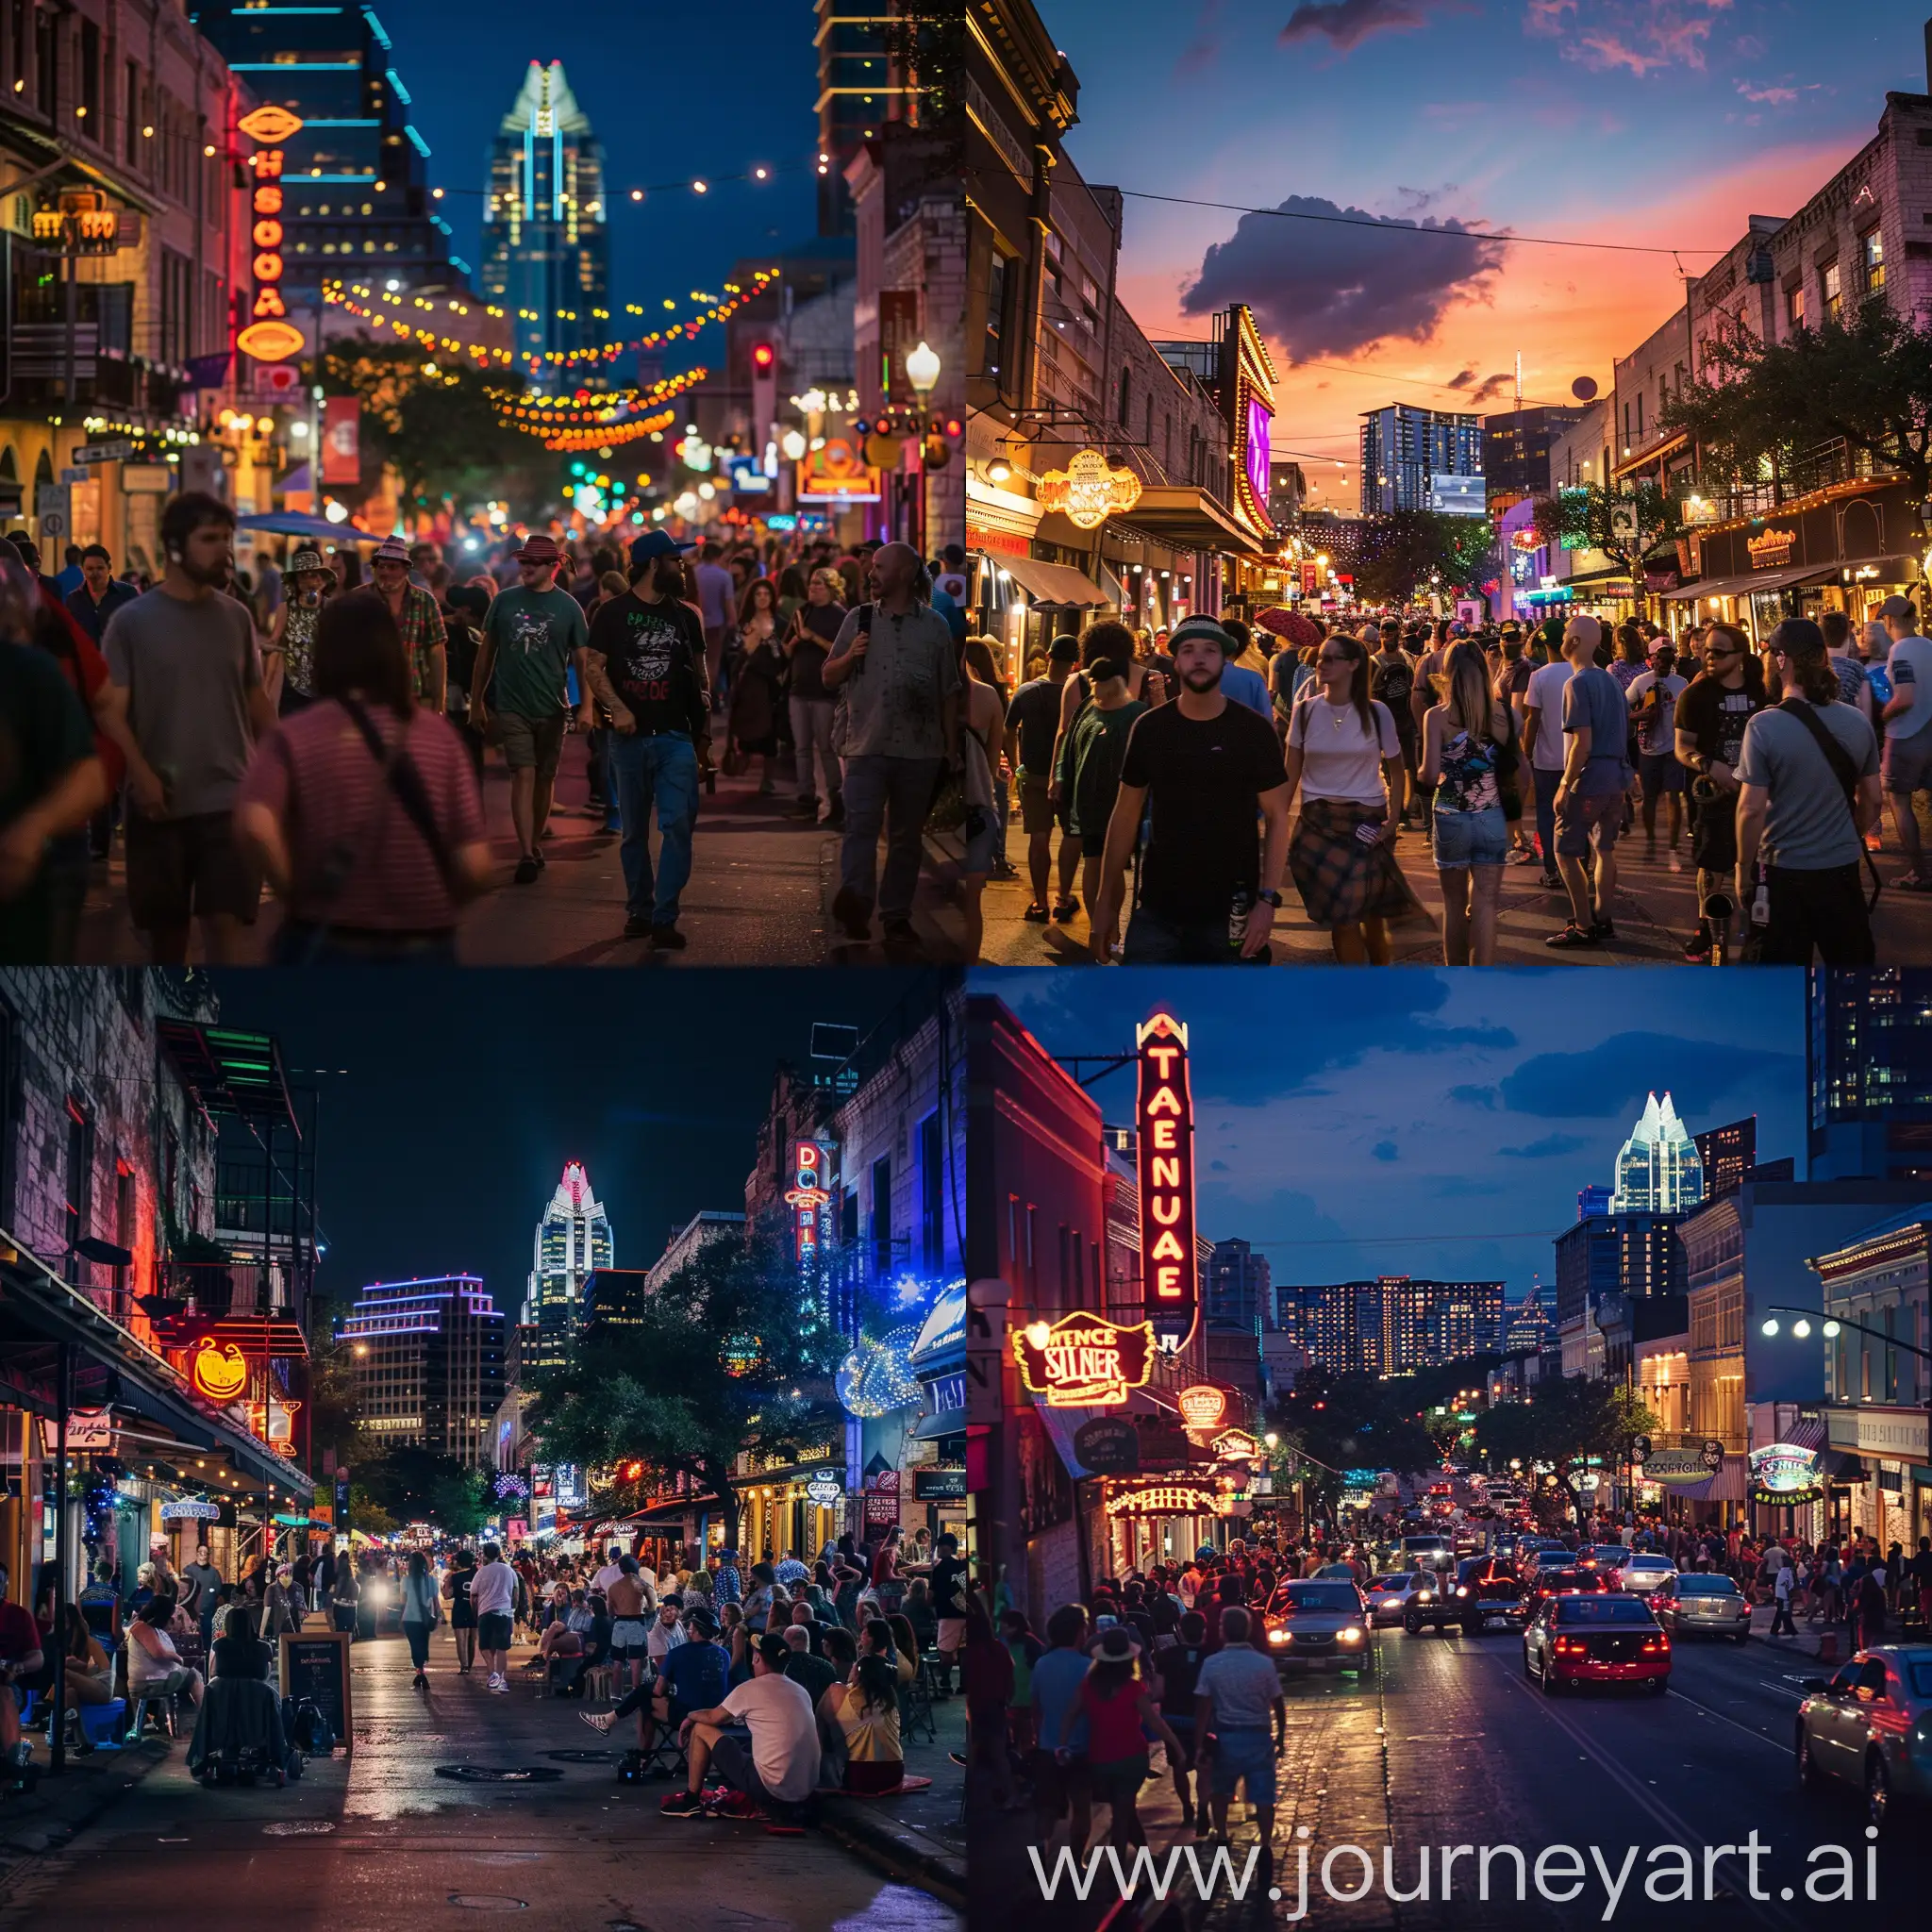 Austin adventure on Sixth Street, the pulsating heart of the city's live music scene. Wander through the lively streets, hopping between renowned music venues that showcase the diverse sounds of Austin's vibrant nightlife.

